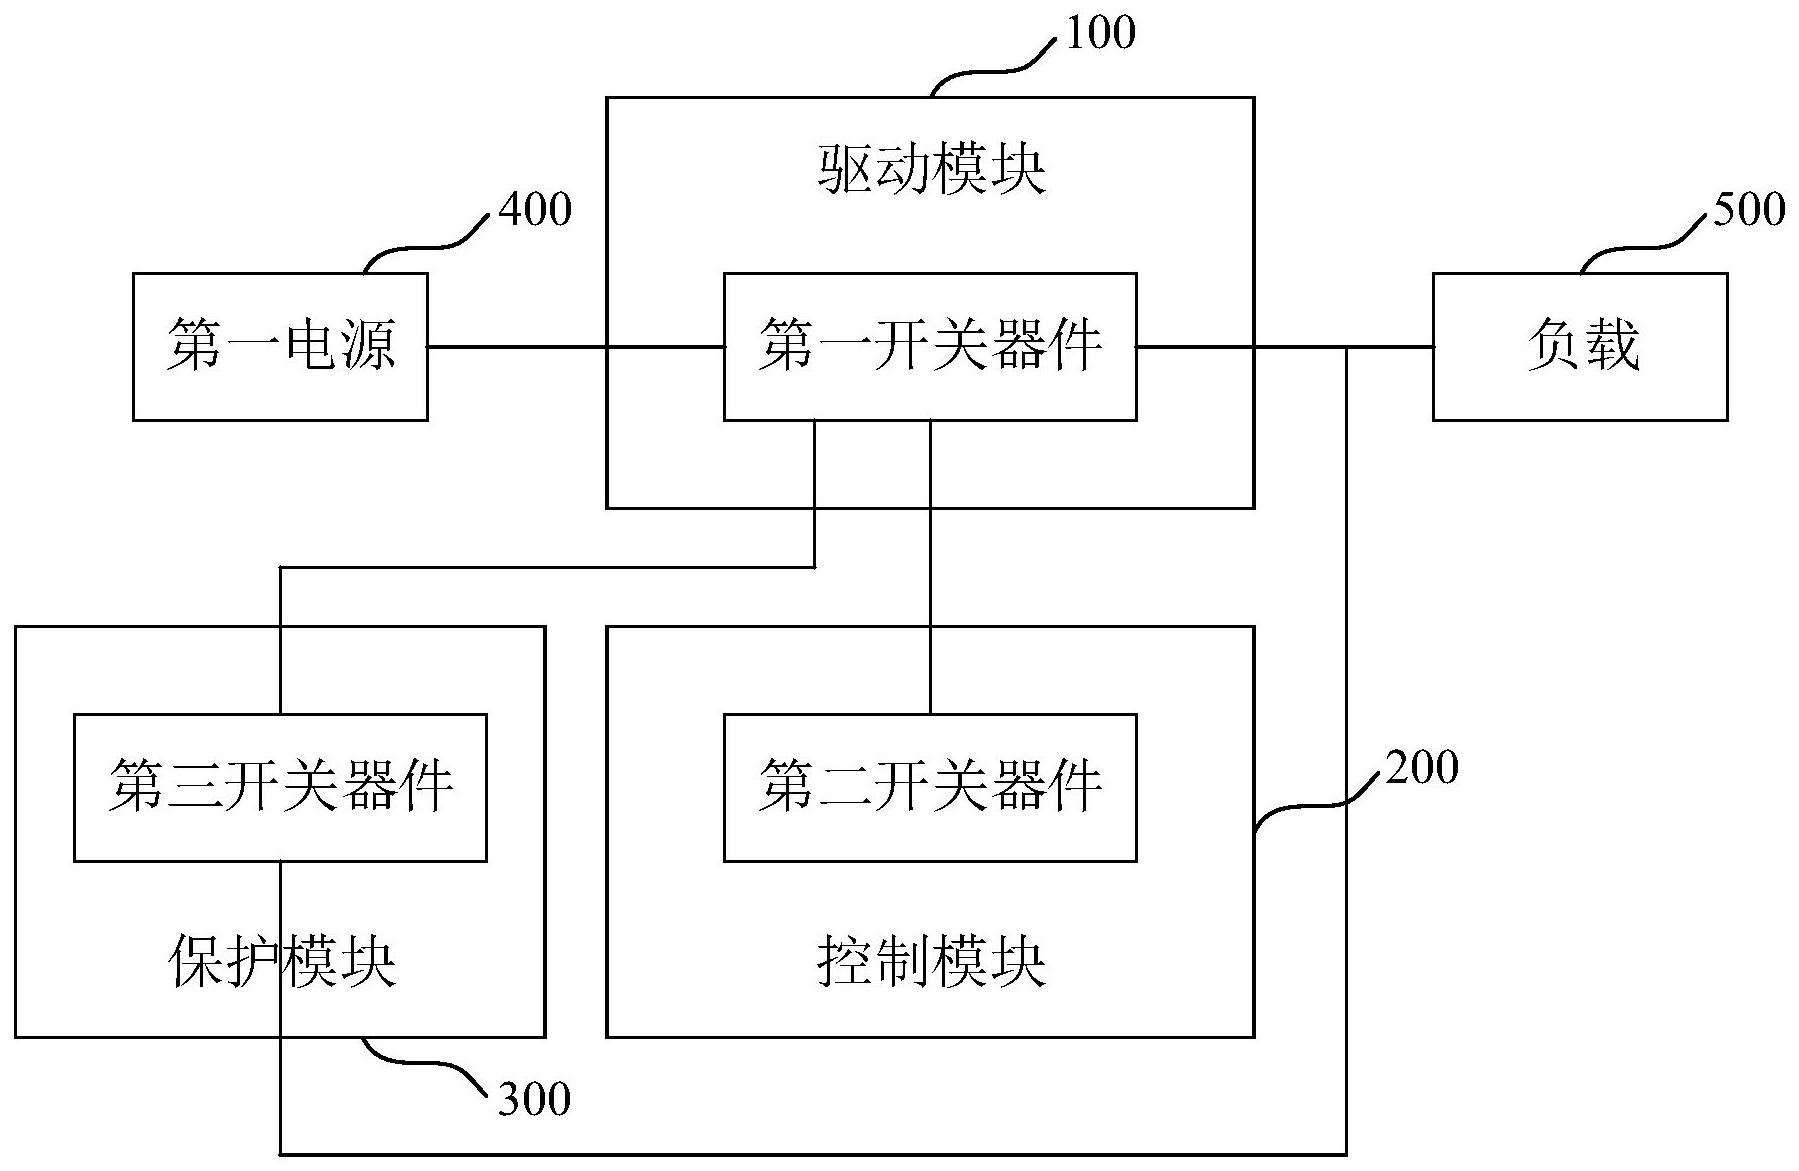 JINGWEI HIRAIN has been granted a utility model patent for 